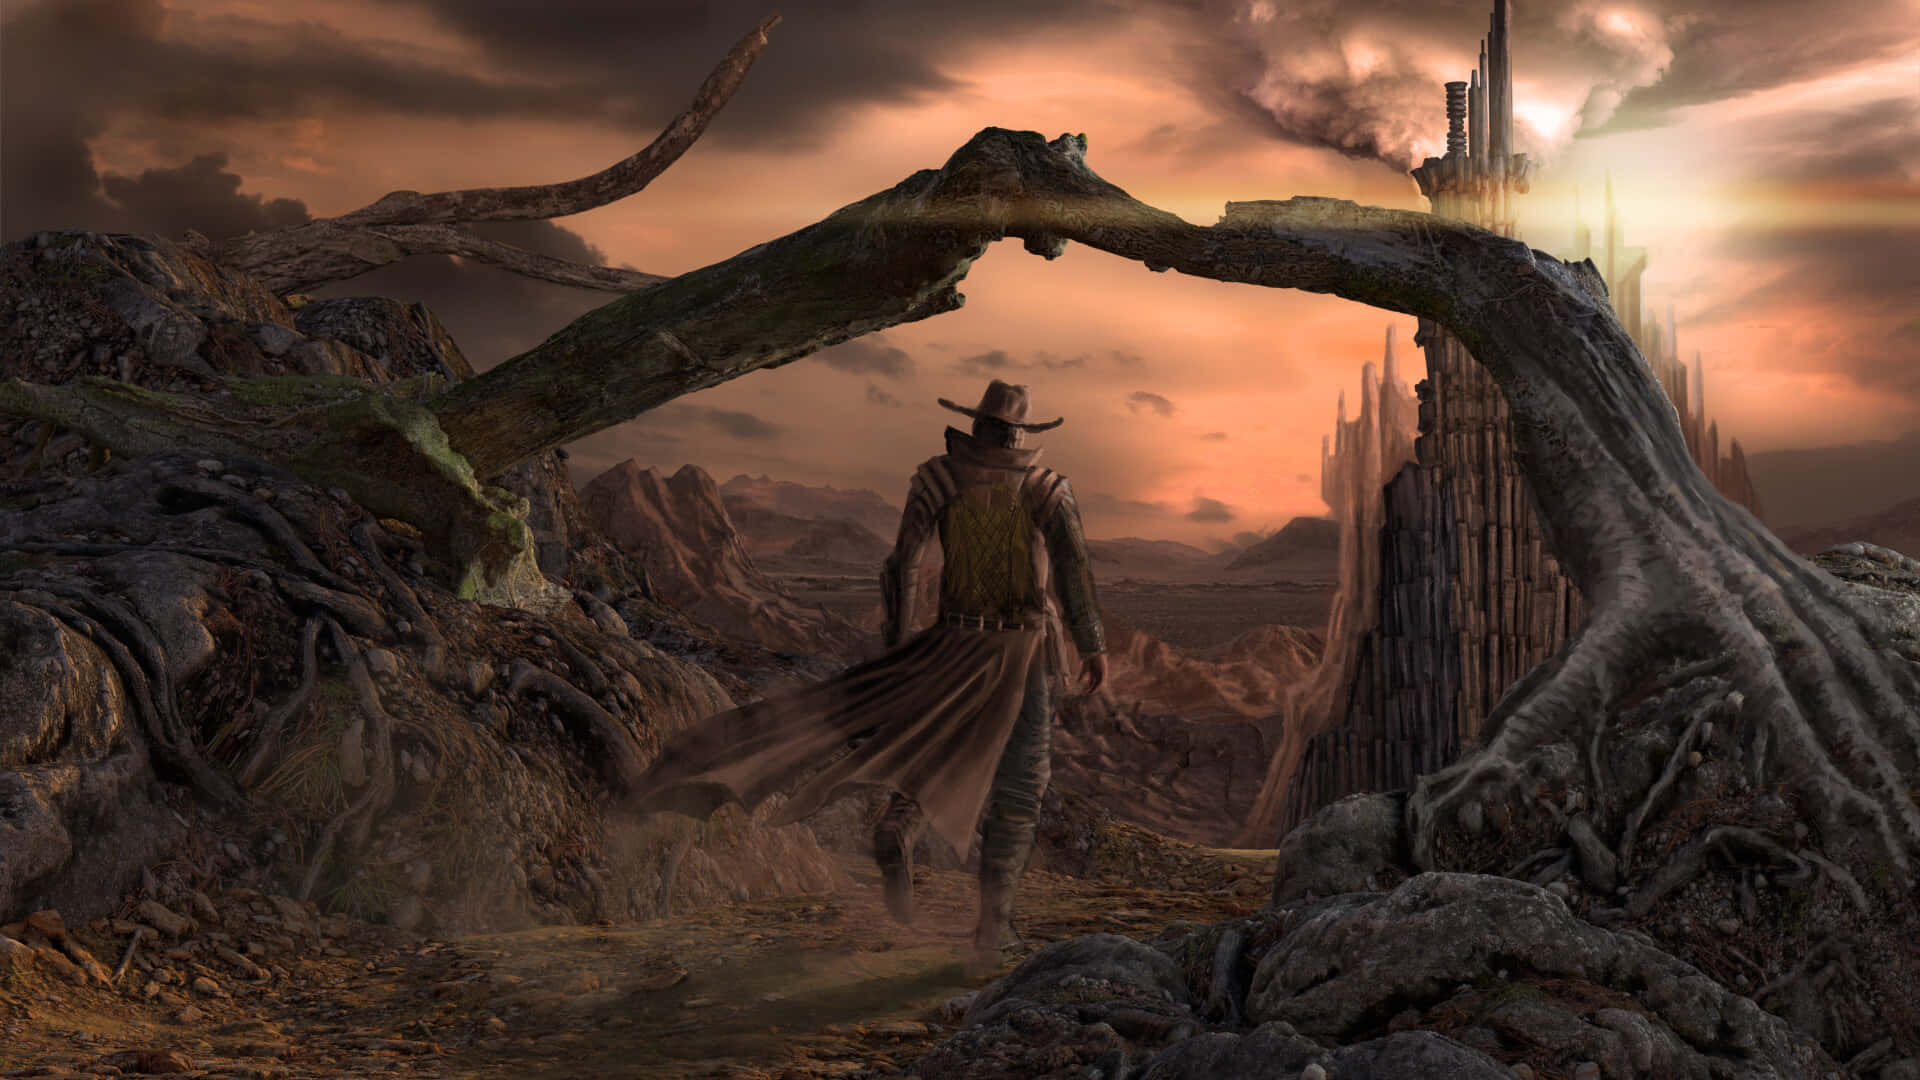 The Dark Tower standing majestically against a mysterious night sky Wallpaper